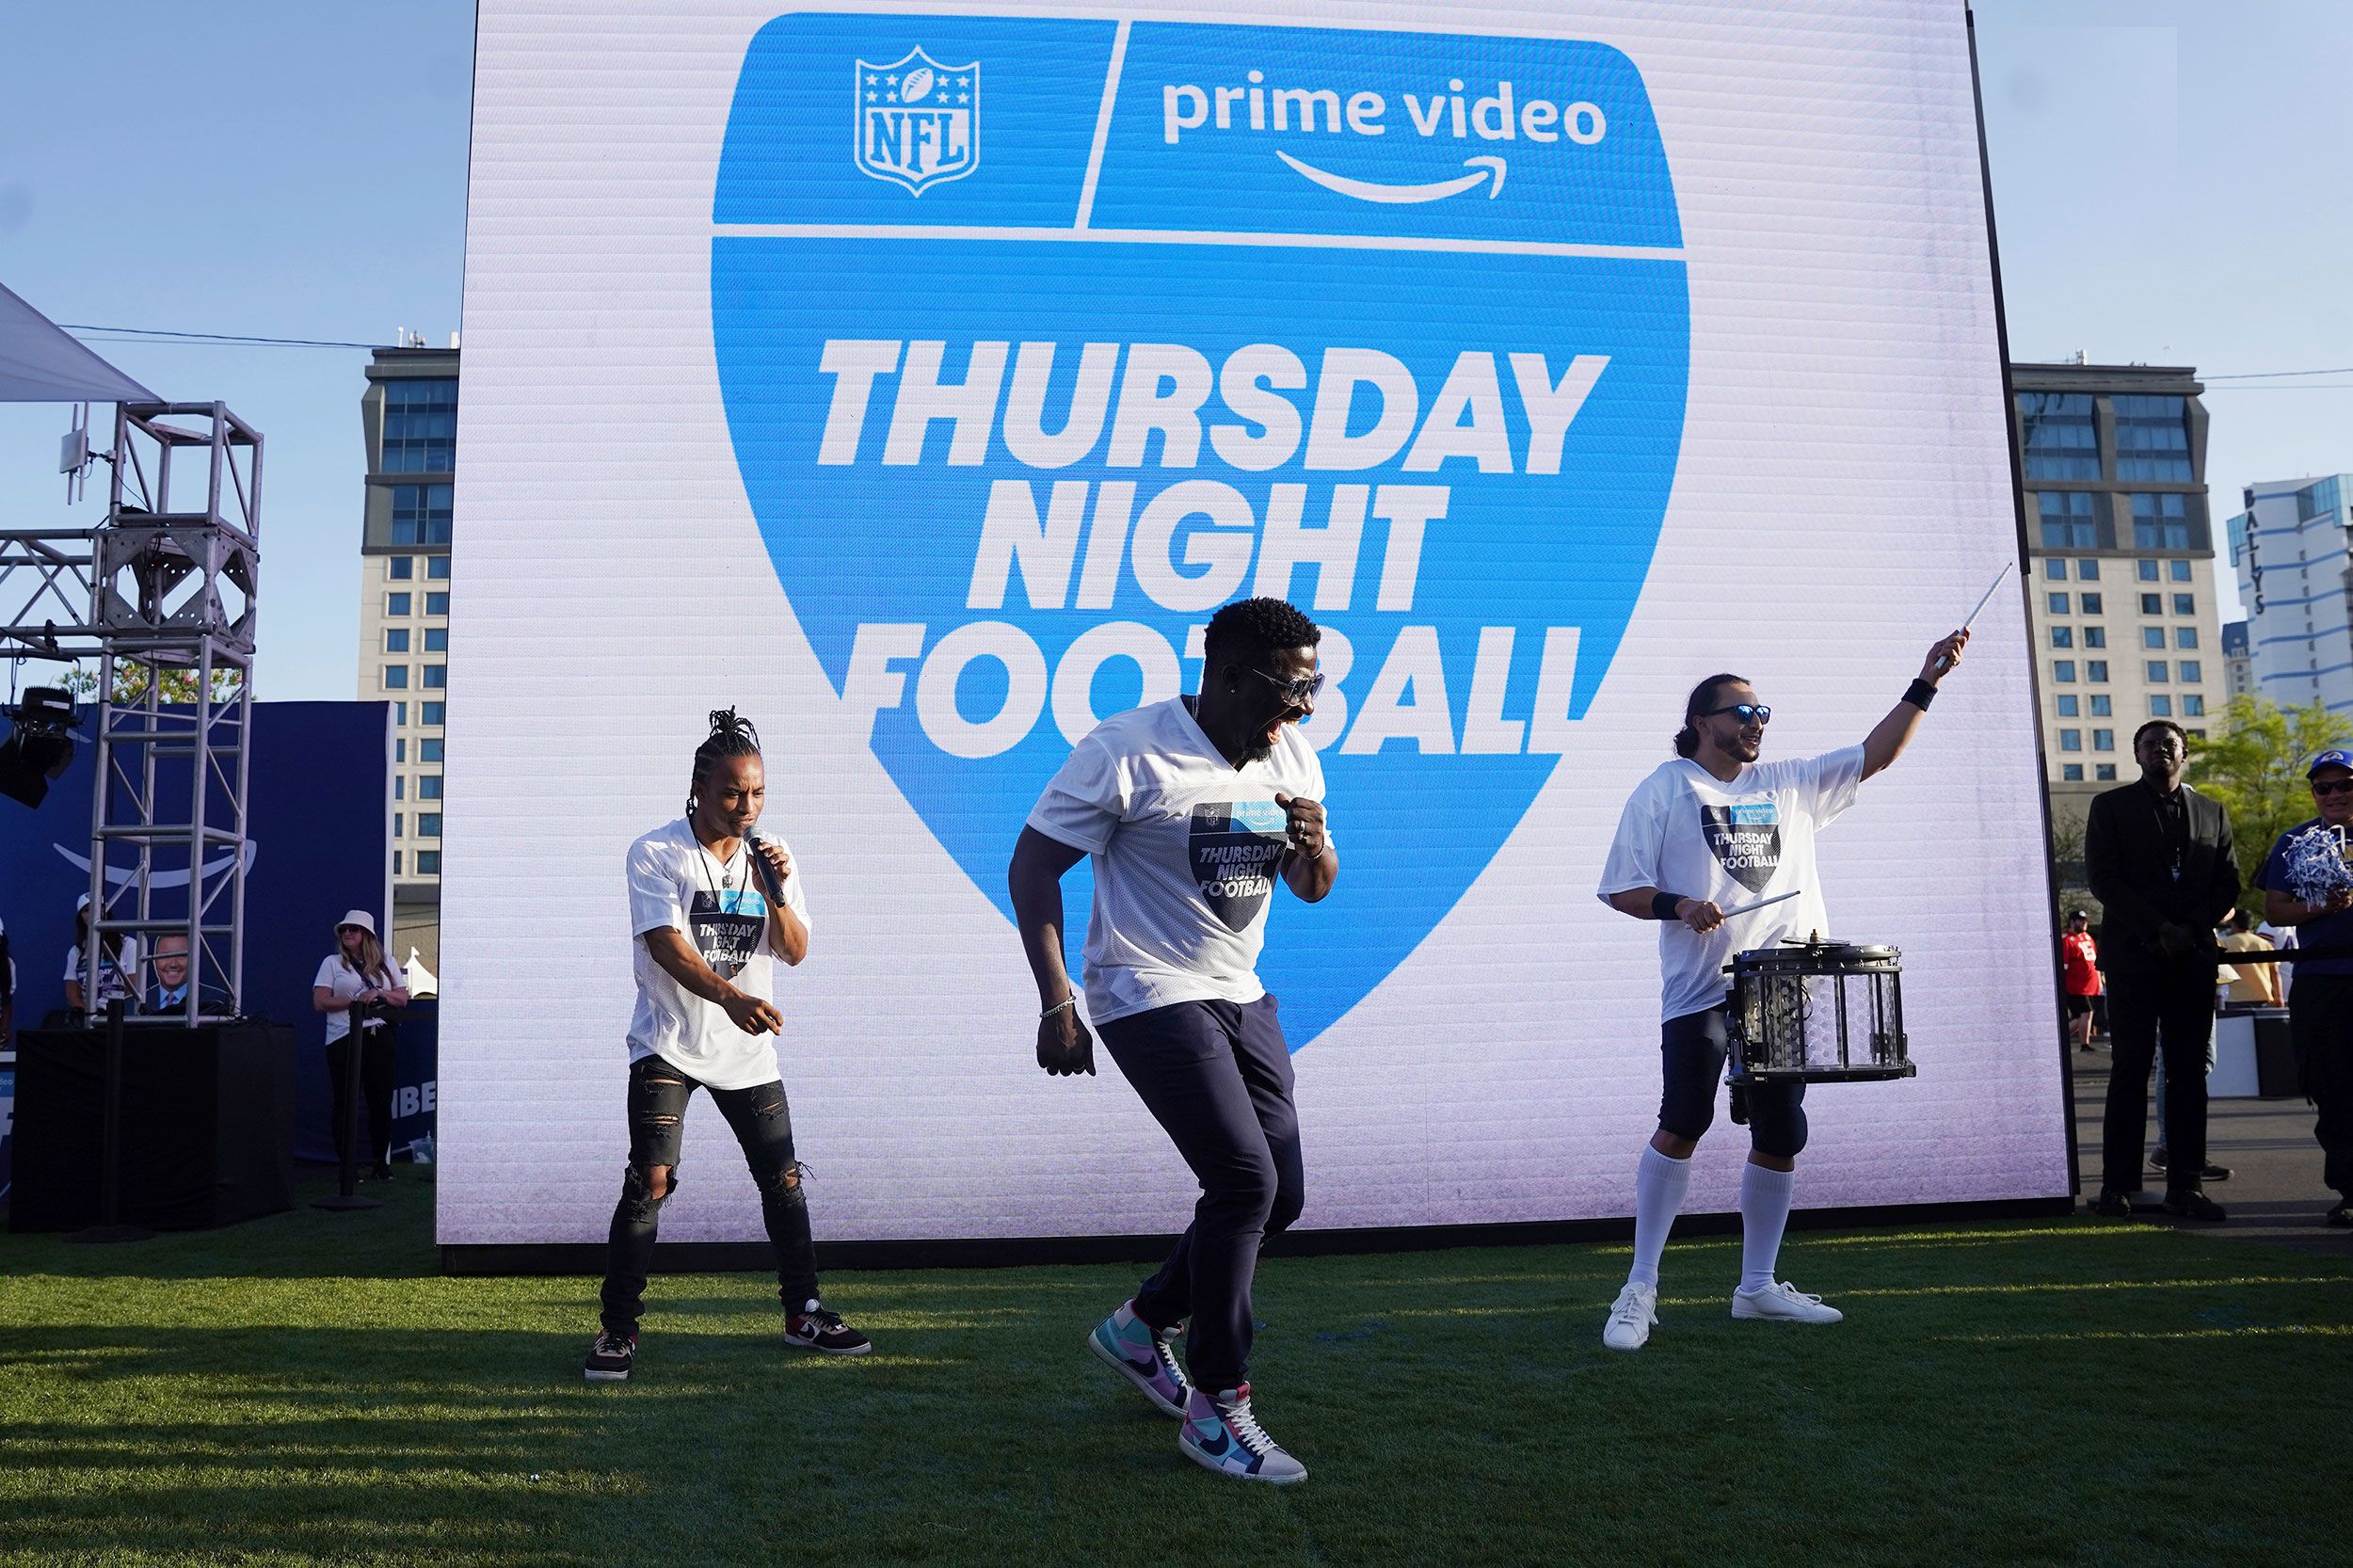 can i watch the super bowl 2022 on amazon prime